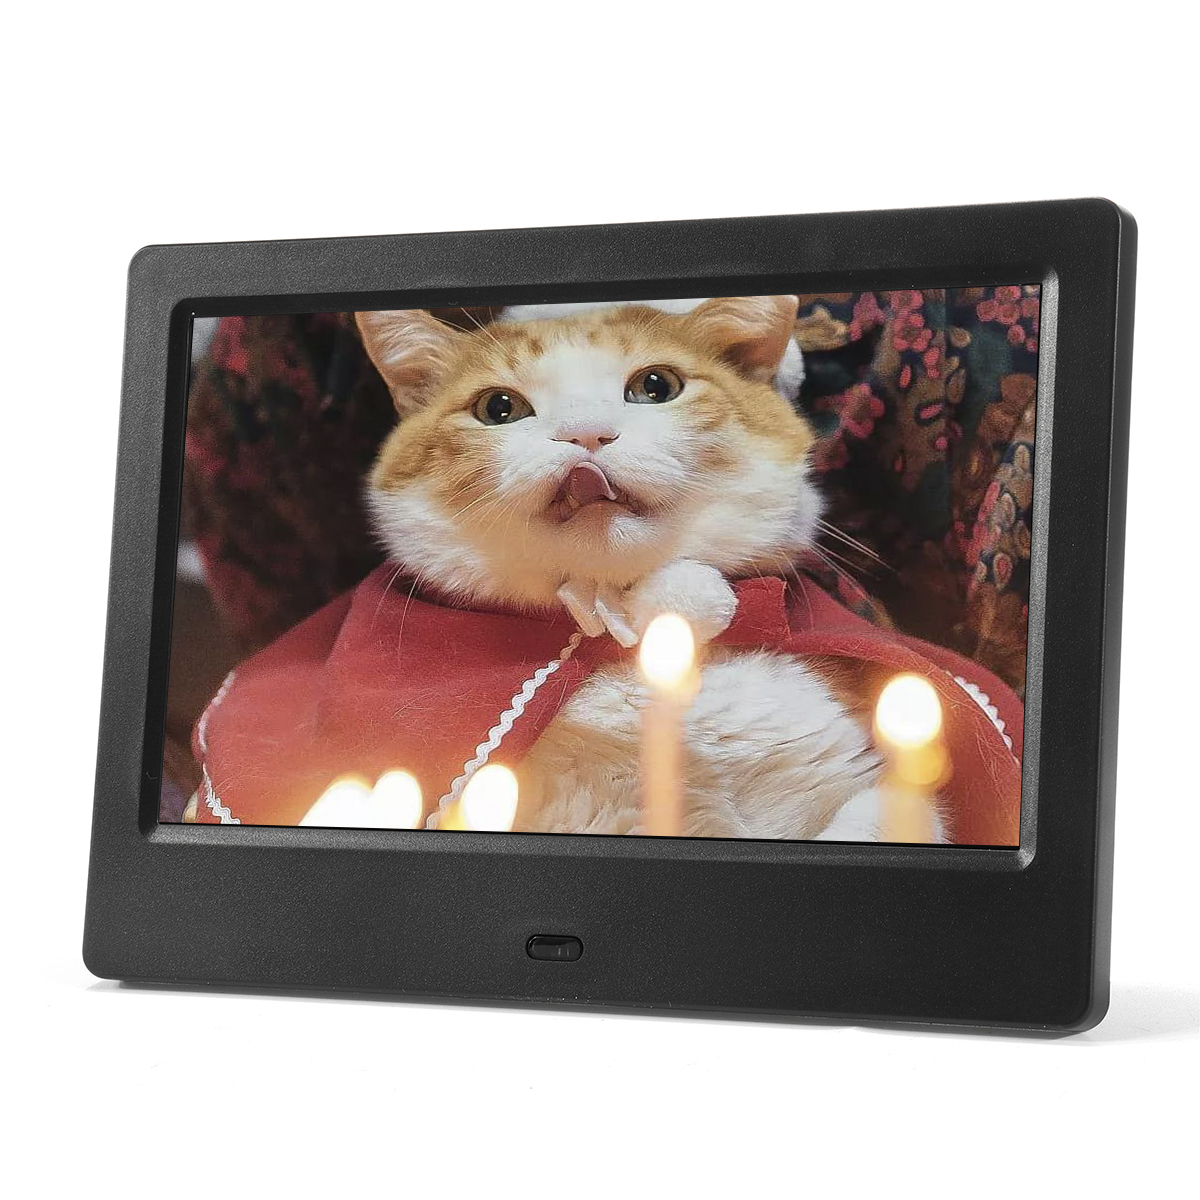 7-Inch-169-HD-Digital-Photo-Frame-Album-Holder-Stand-Home-Decor-with-Remote-Control-1557485-2